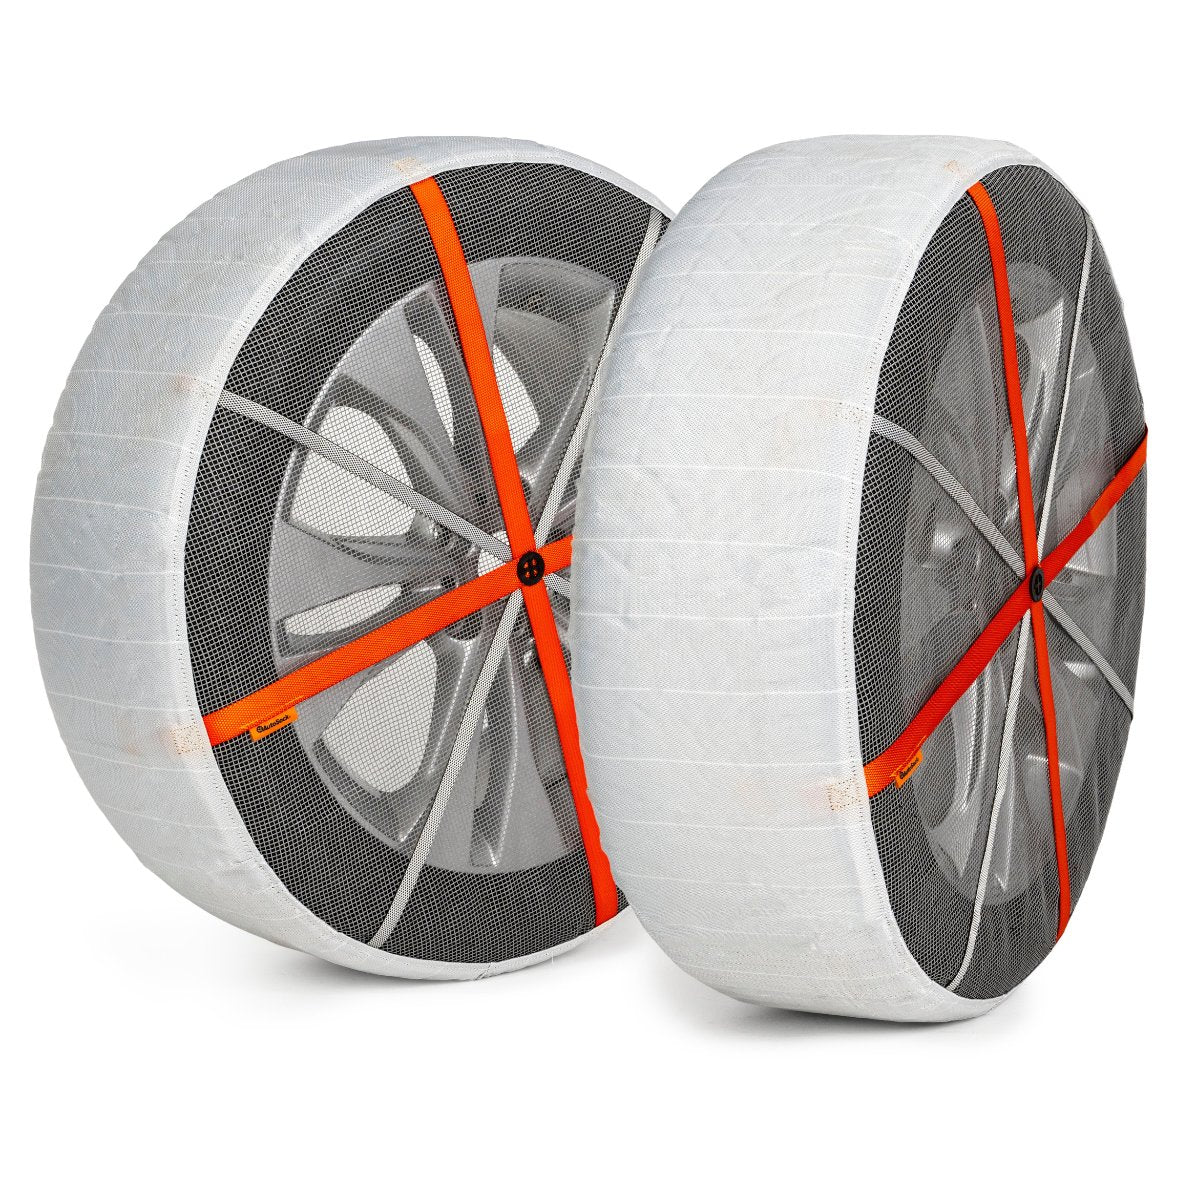 Pair of AutoSock textile snow chains installed on two wheels in front of white background showing product frontside AL79 AL 79